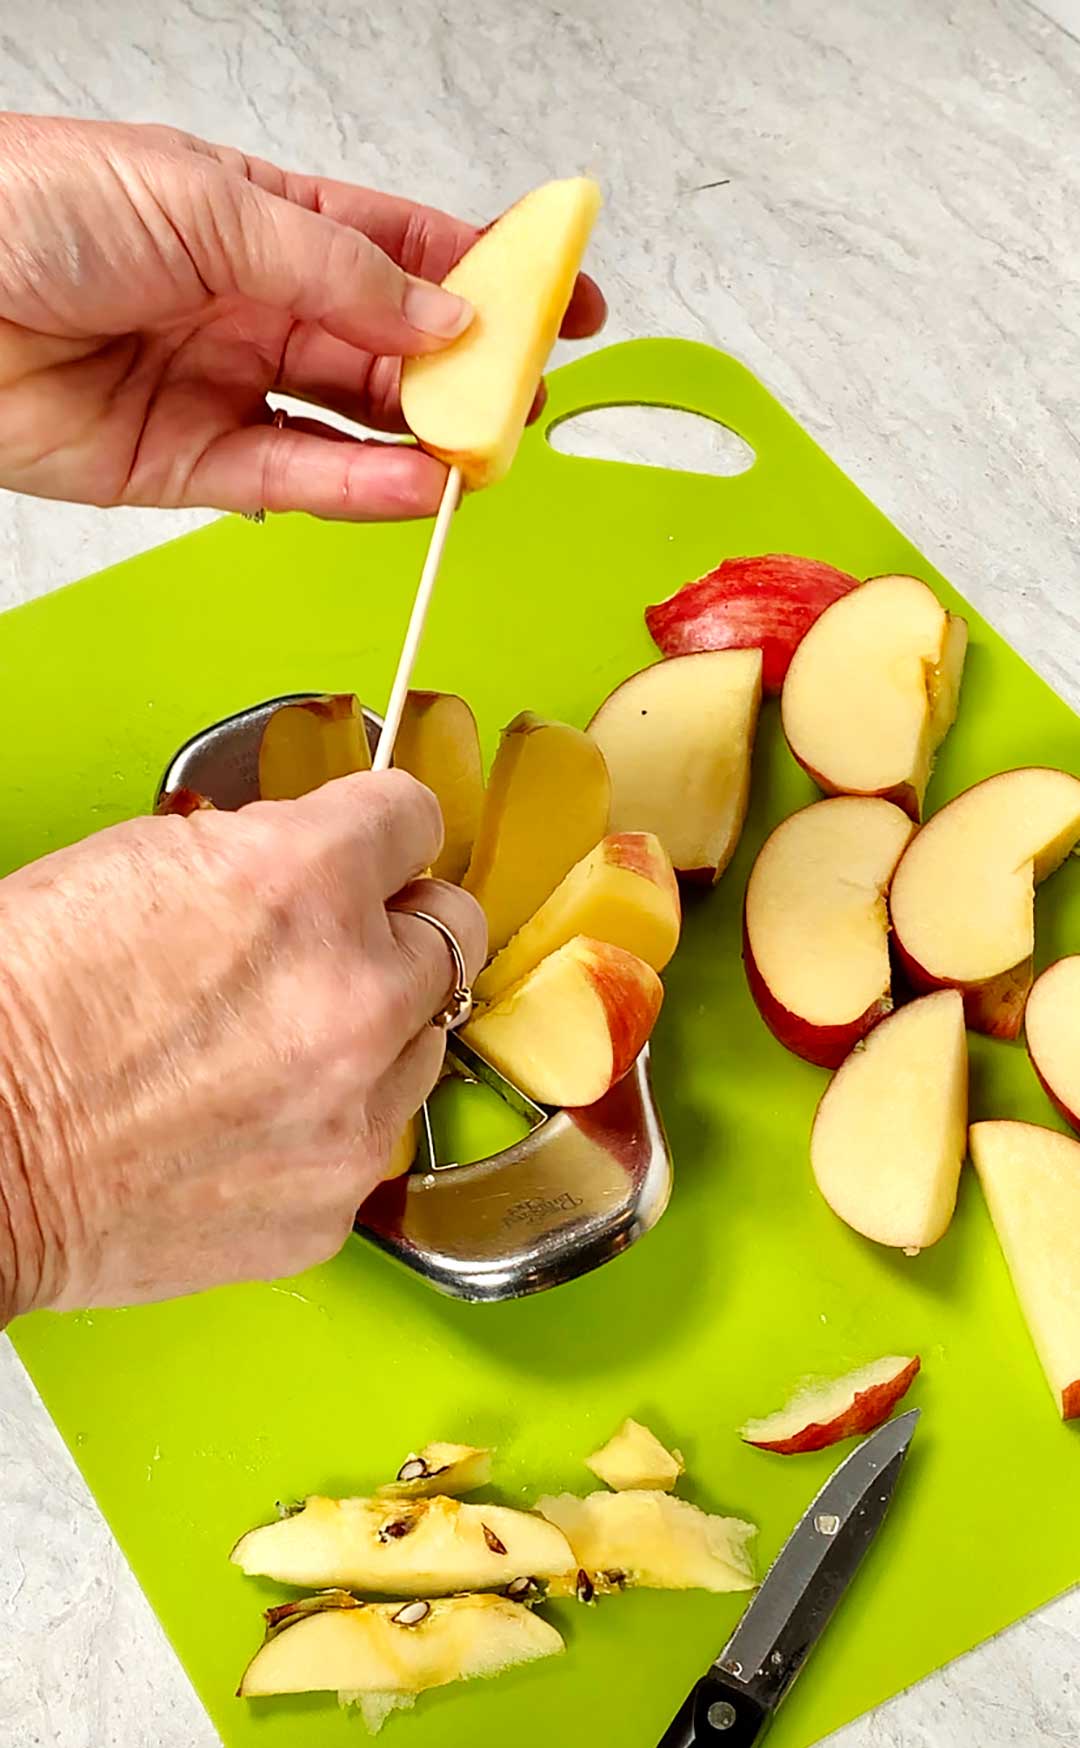 Person sticking stick through apple slice with other apple slices nearby on bright green cutting board.